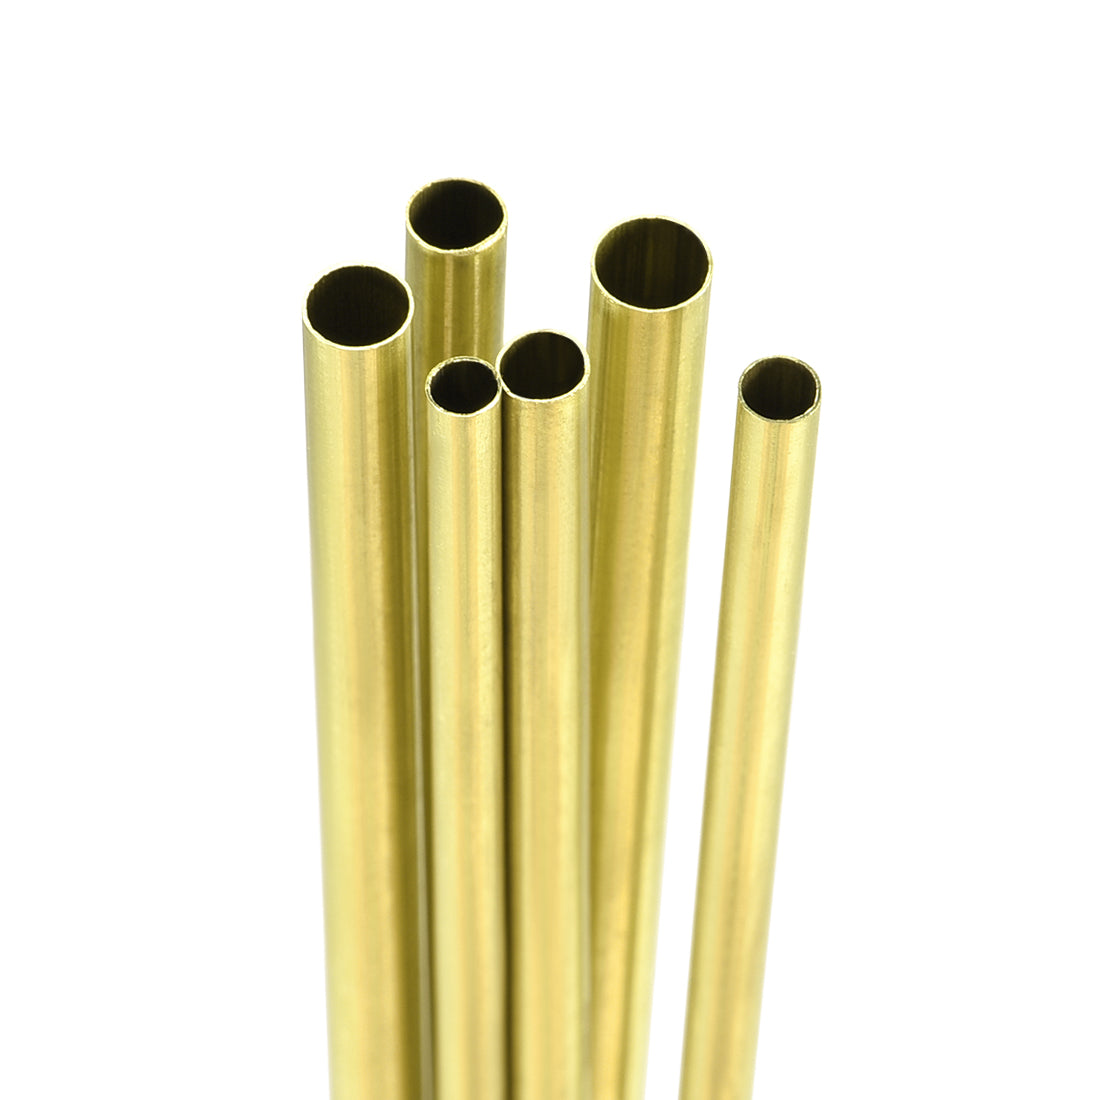 uxcell Uxcell Brass Tube, 4mm 4.5mm 5mm 5.5mm 6mm 6.5mm OD X 0.2mm Wall Thickness 300mm Length Seamless Round Pipe Tubing, Pack of 6